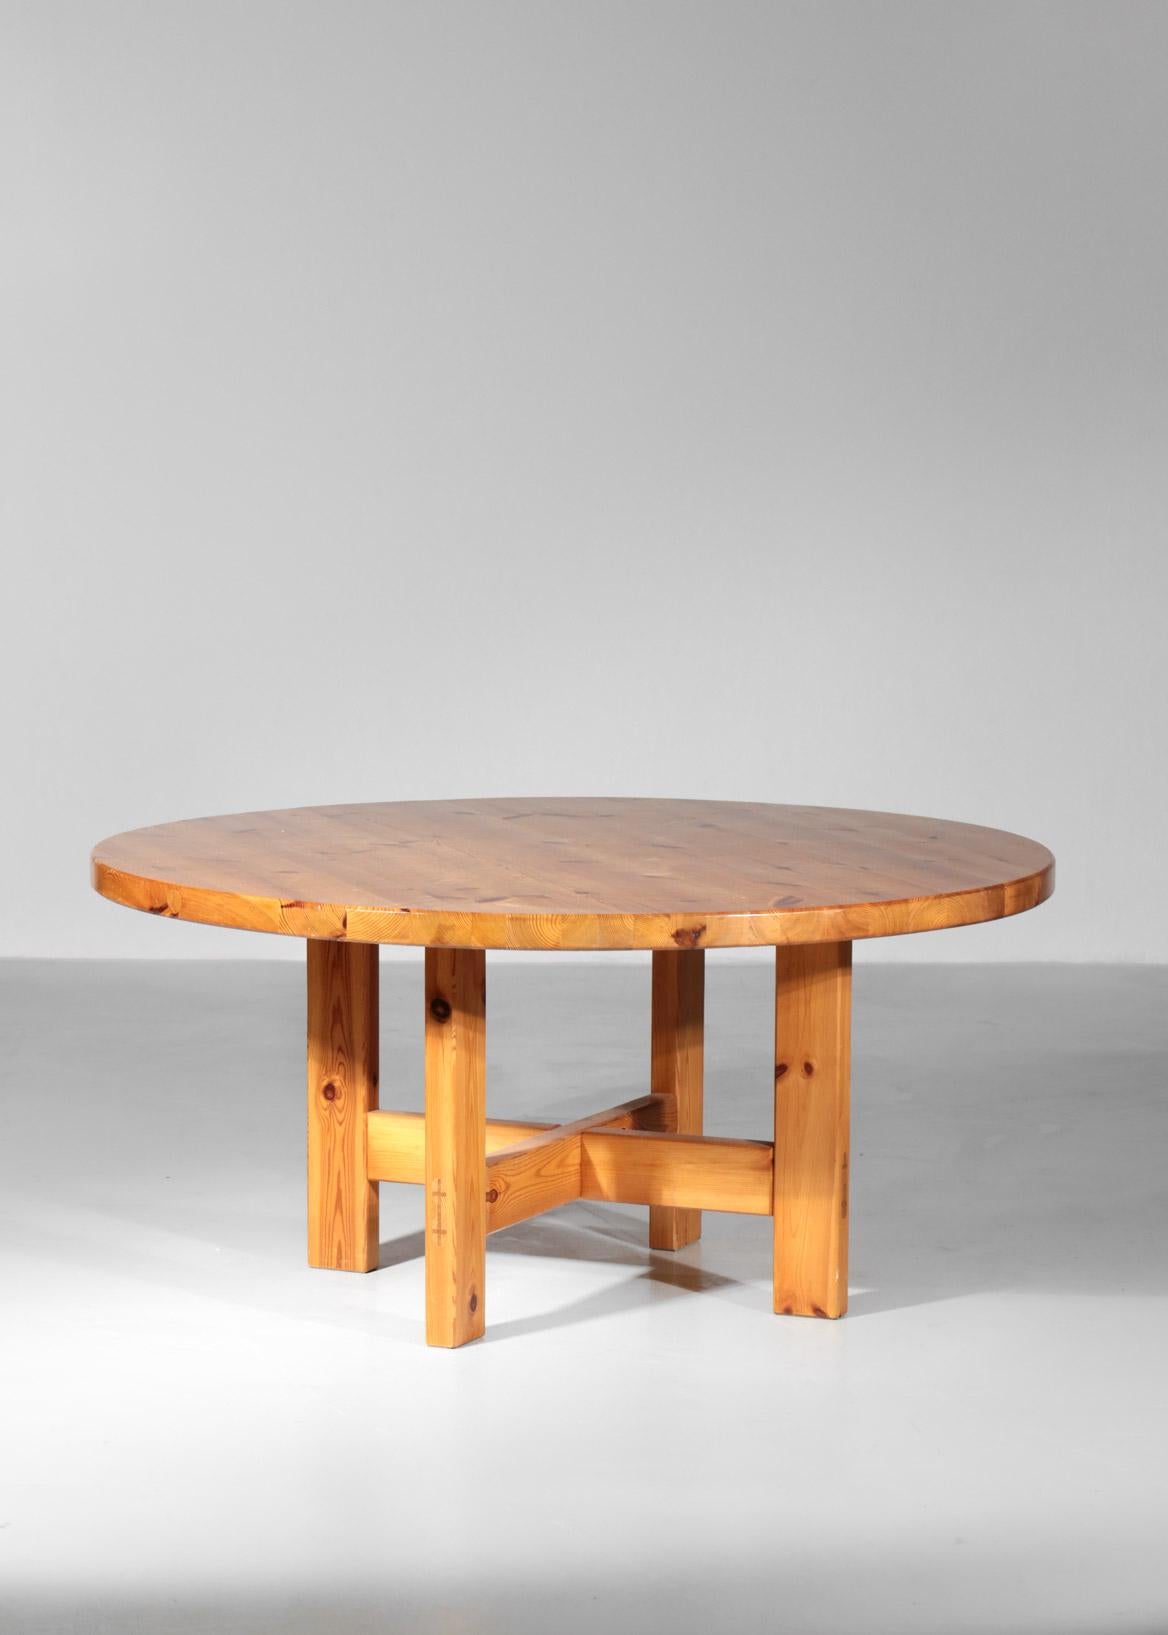 Large round table made of pine by Roland Wilhemsson.
Thickness to the top 5.5 cm.